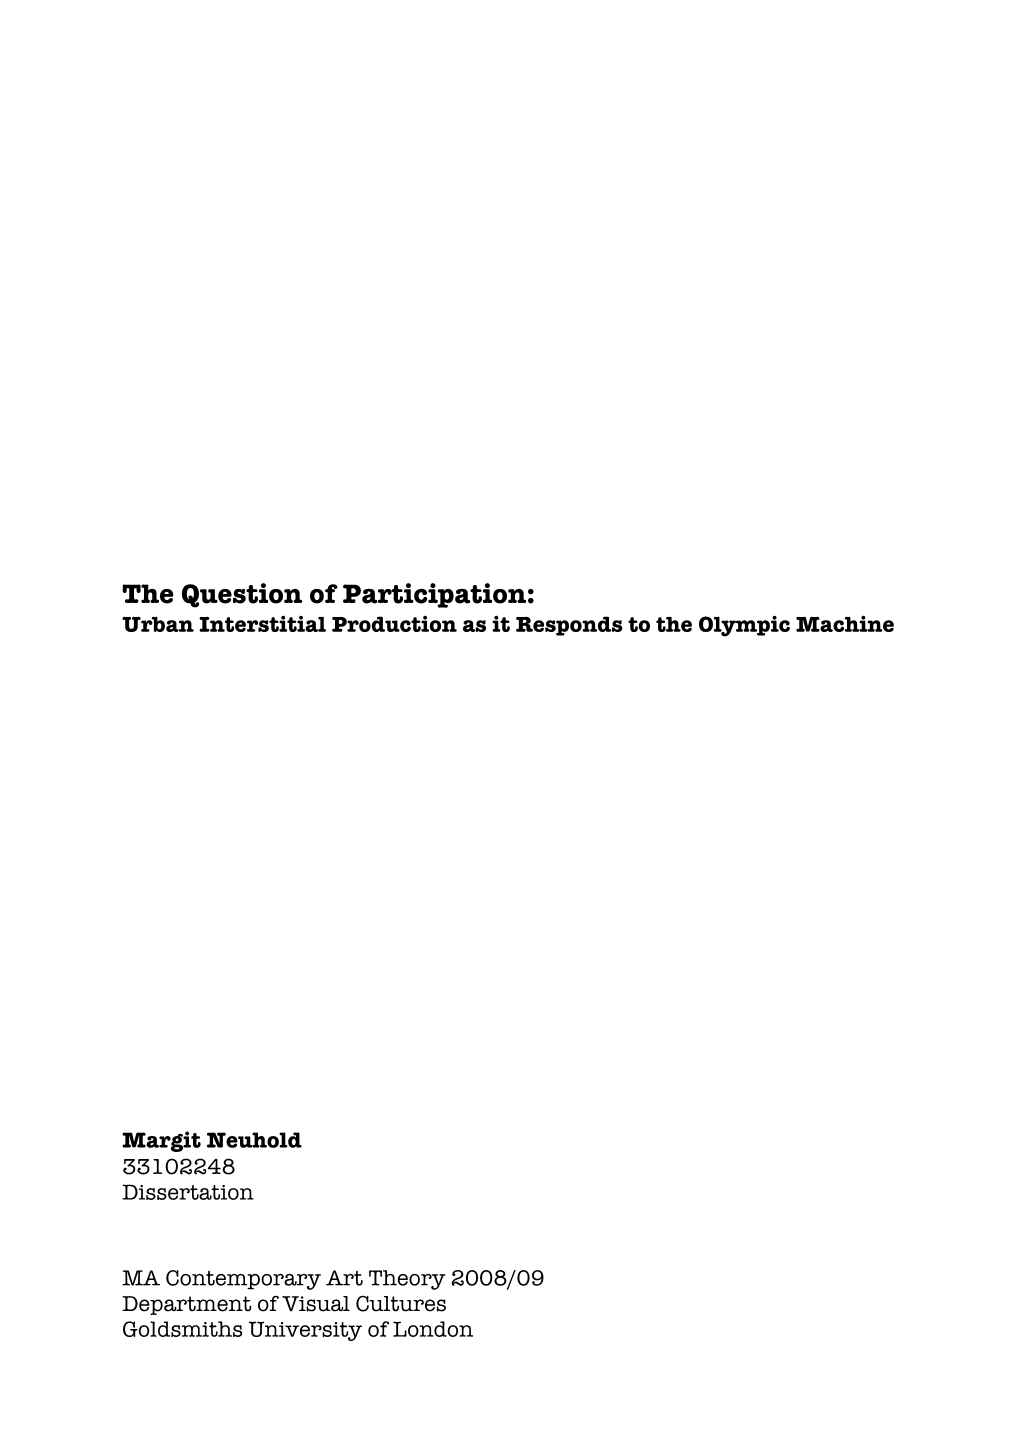 The Question of Participation: Urban Interstitial Production As It Responds to the Olympic Machine